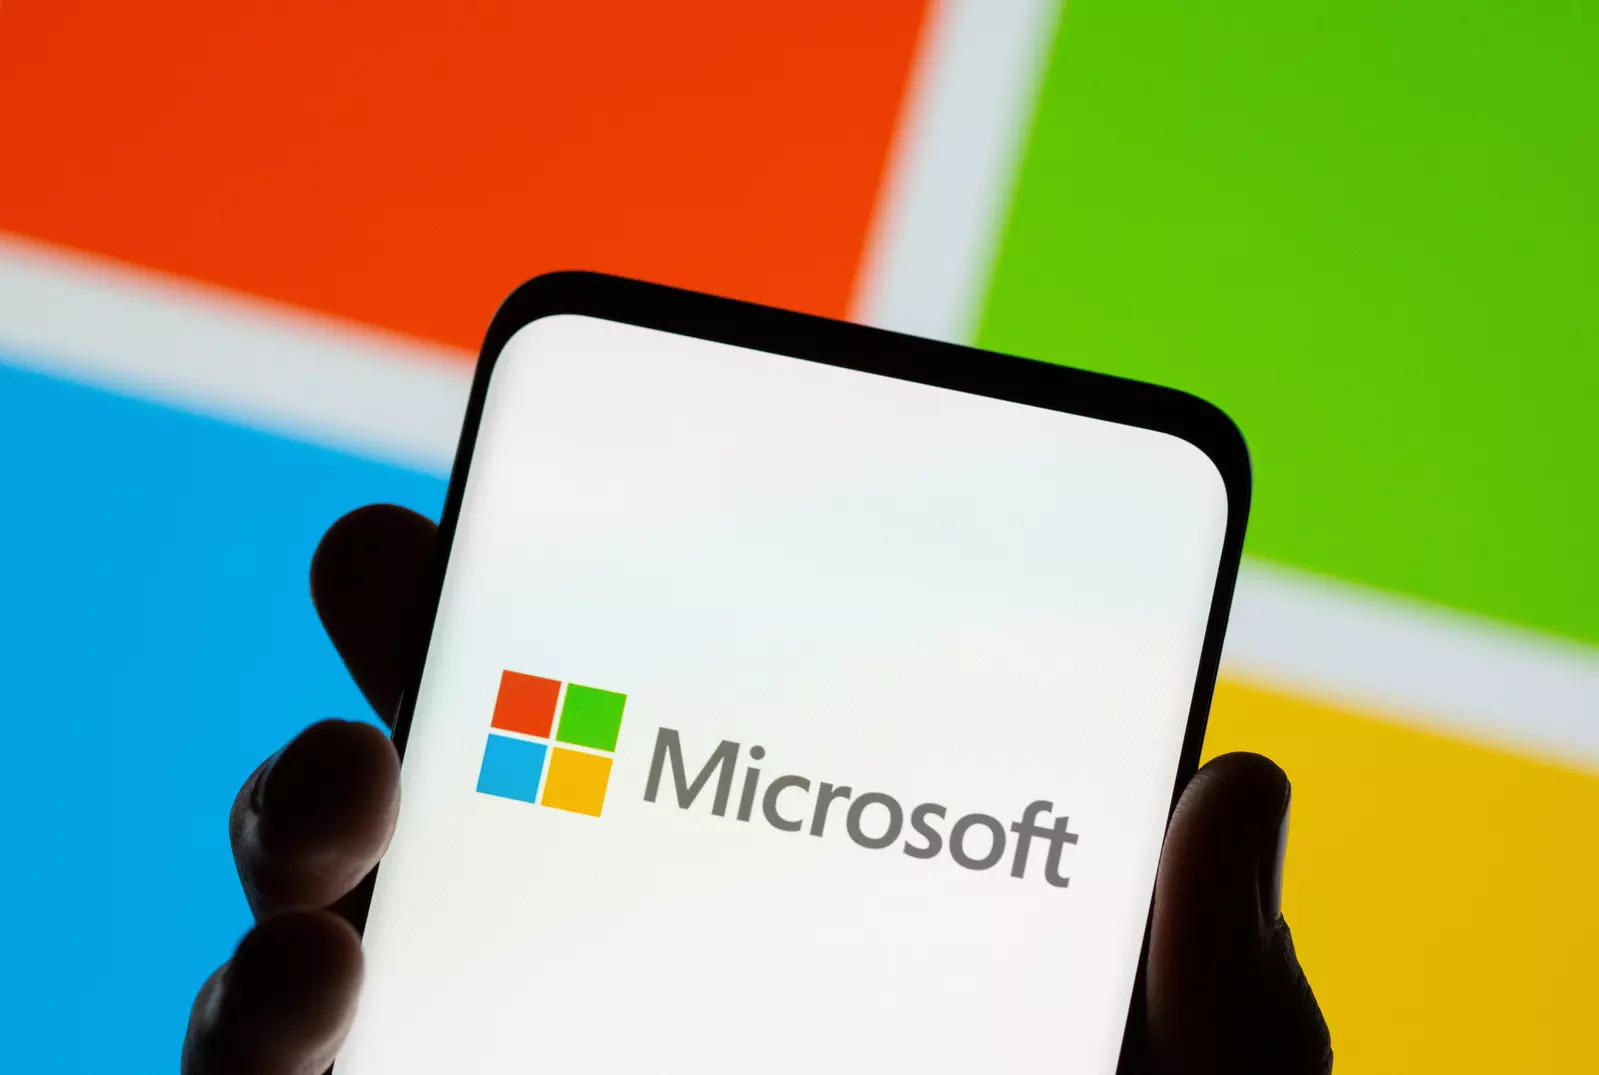     A smartphone is seen in front of the Microsoft logo in this illustration taken on July 26, 2021.  REUTERS/Dado Ruvic/Illustration